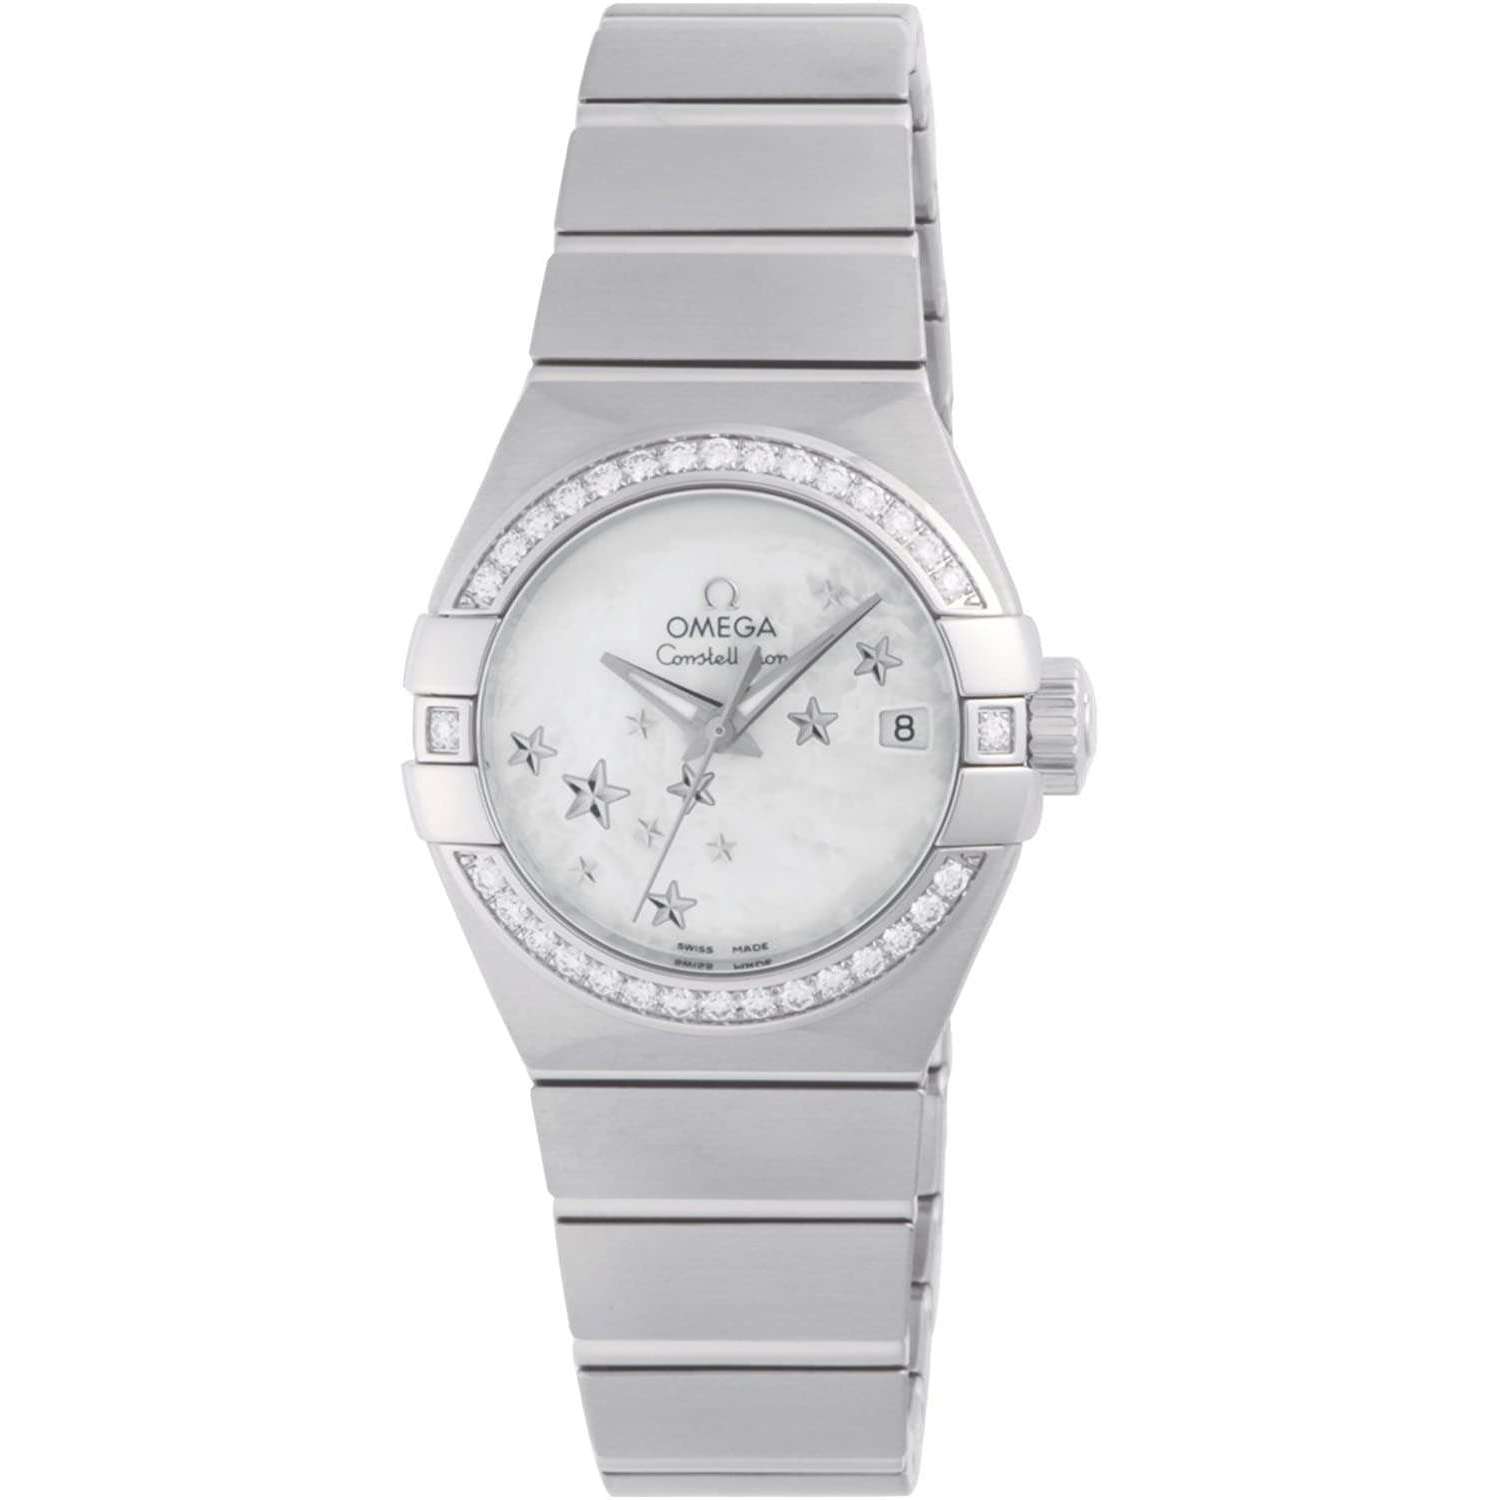 ROOK JAPAN:OMEGA CONSTELLATION CO‑AXIAL CHRONOMETER 27 MM WOMEN WATCH 123.15.27.20.05.001,Luxury Watch,Omega